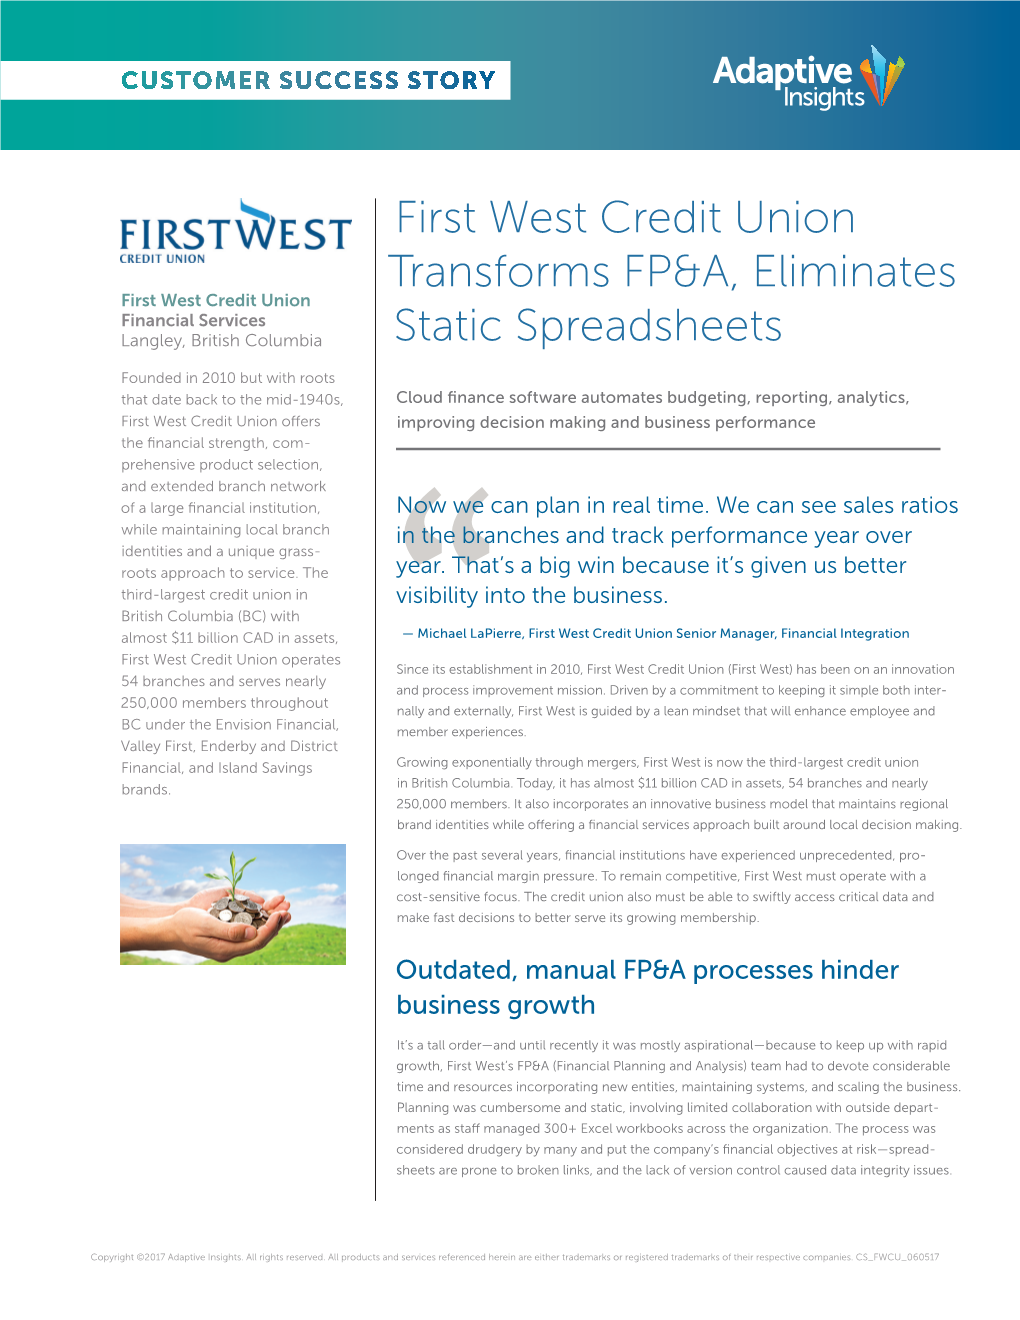 First West Credit Union Transforms FP&A, Eliminates Static Spreadsheets